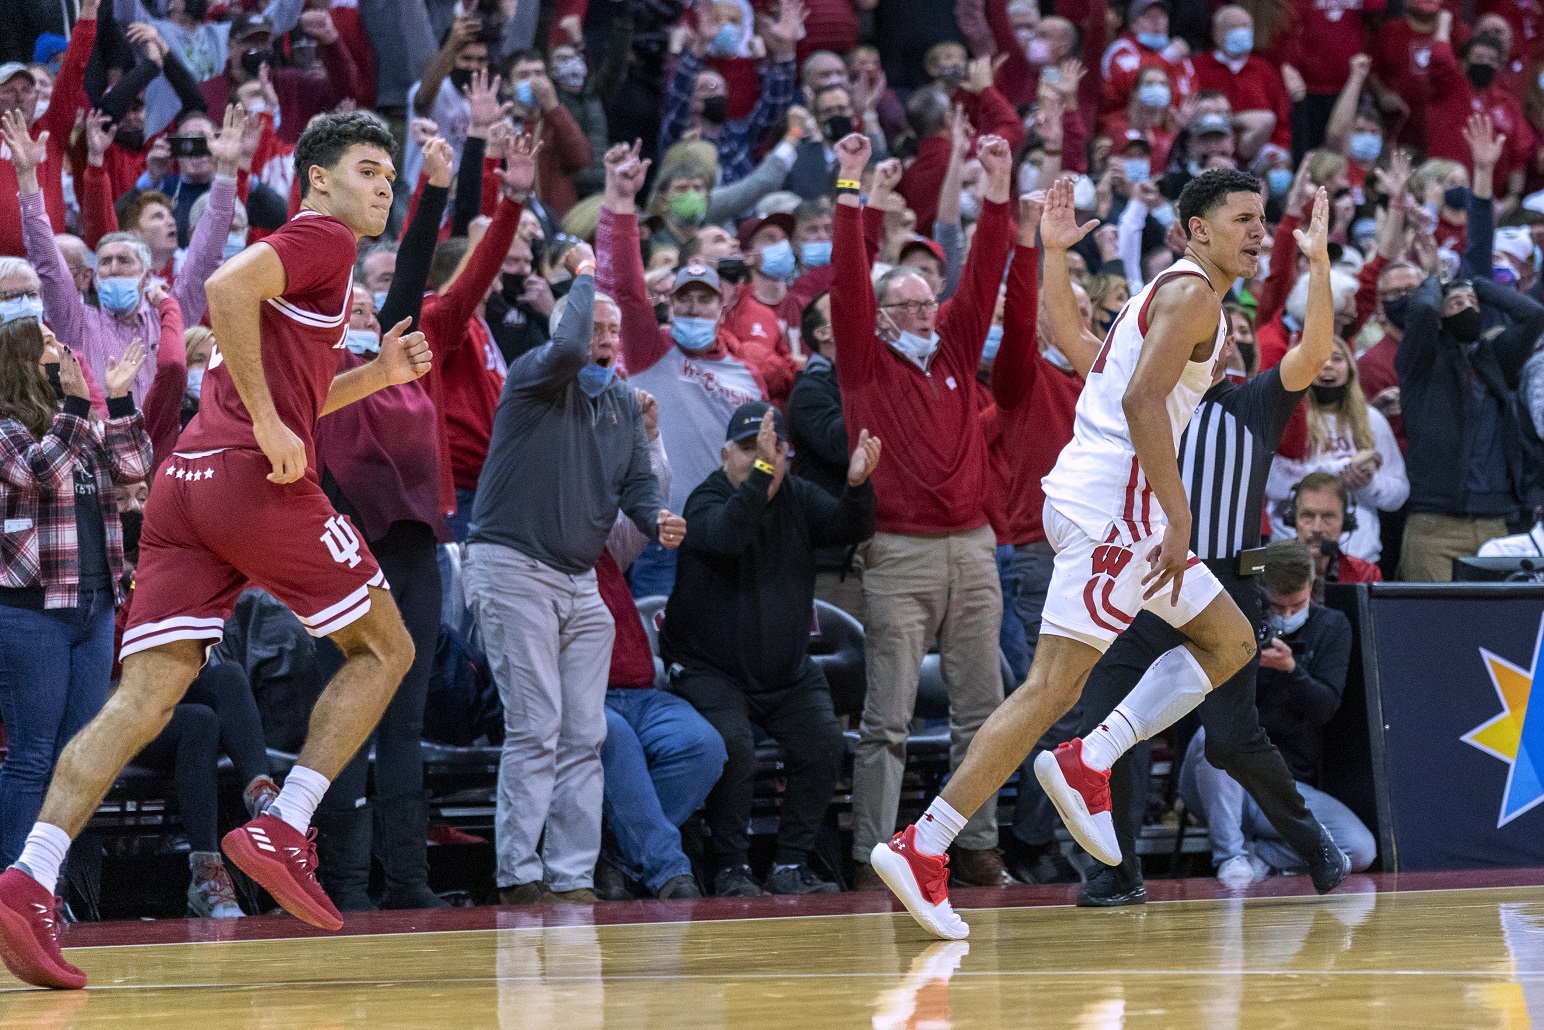 WATCH: Davis’ sick 3 gives Badgers lead, completes biggest comeback in school history